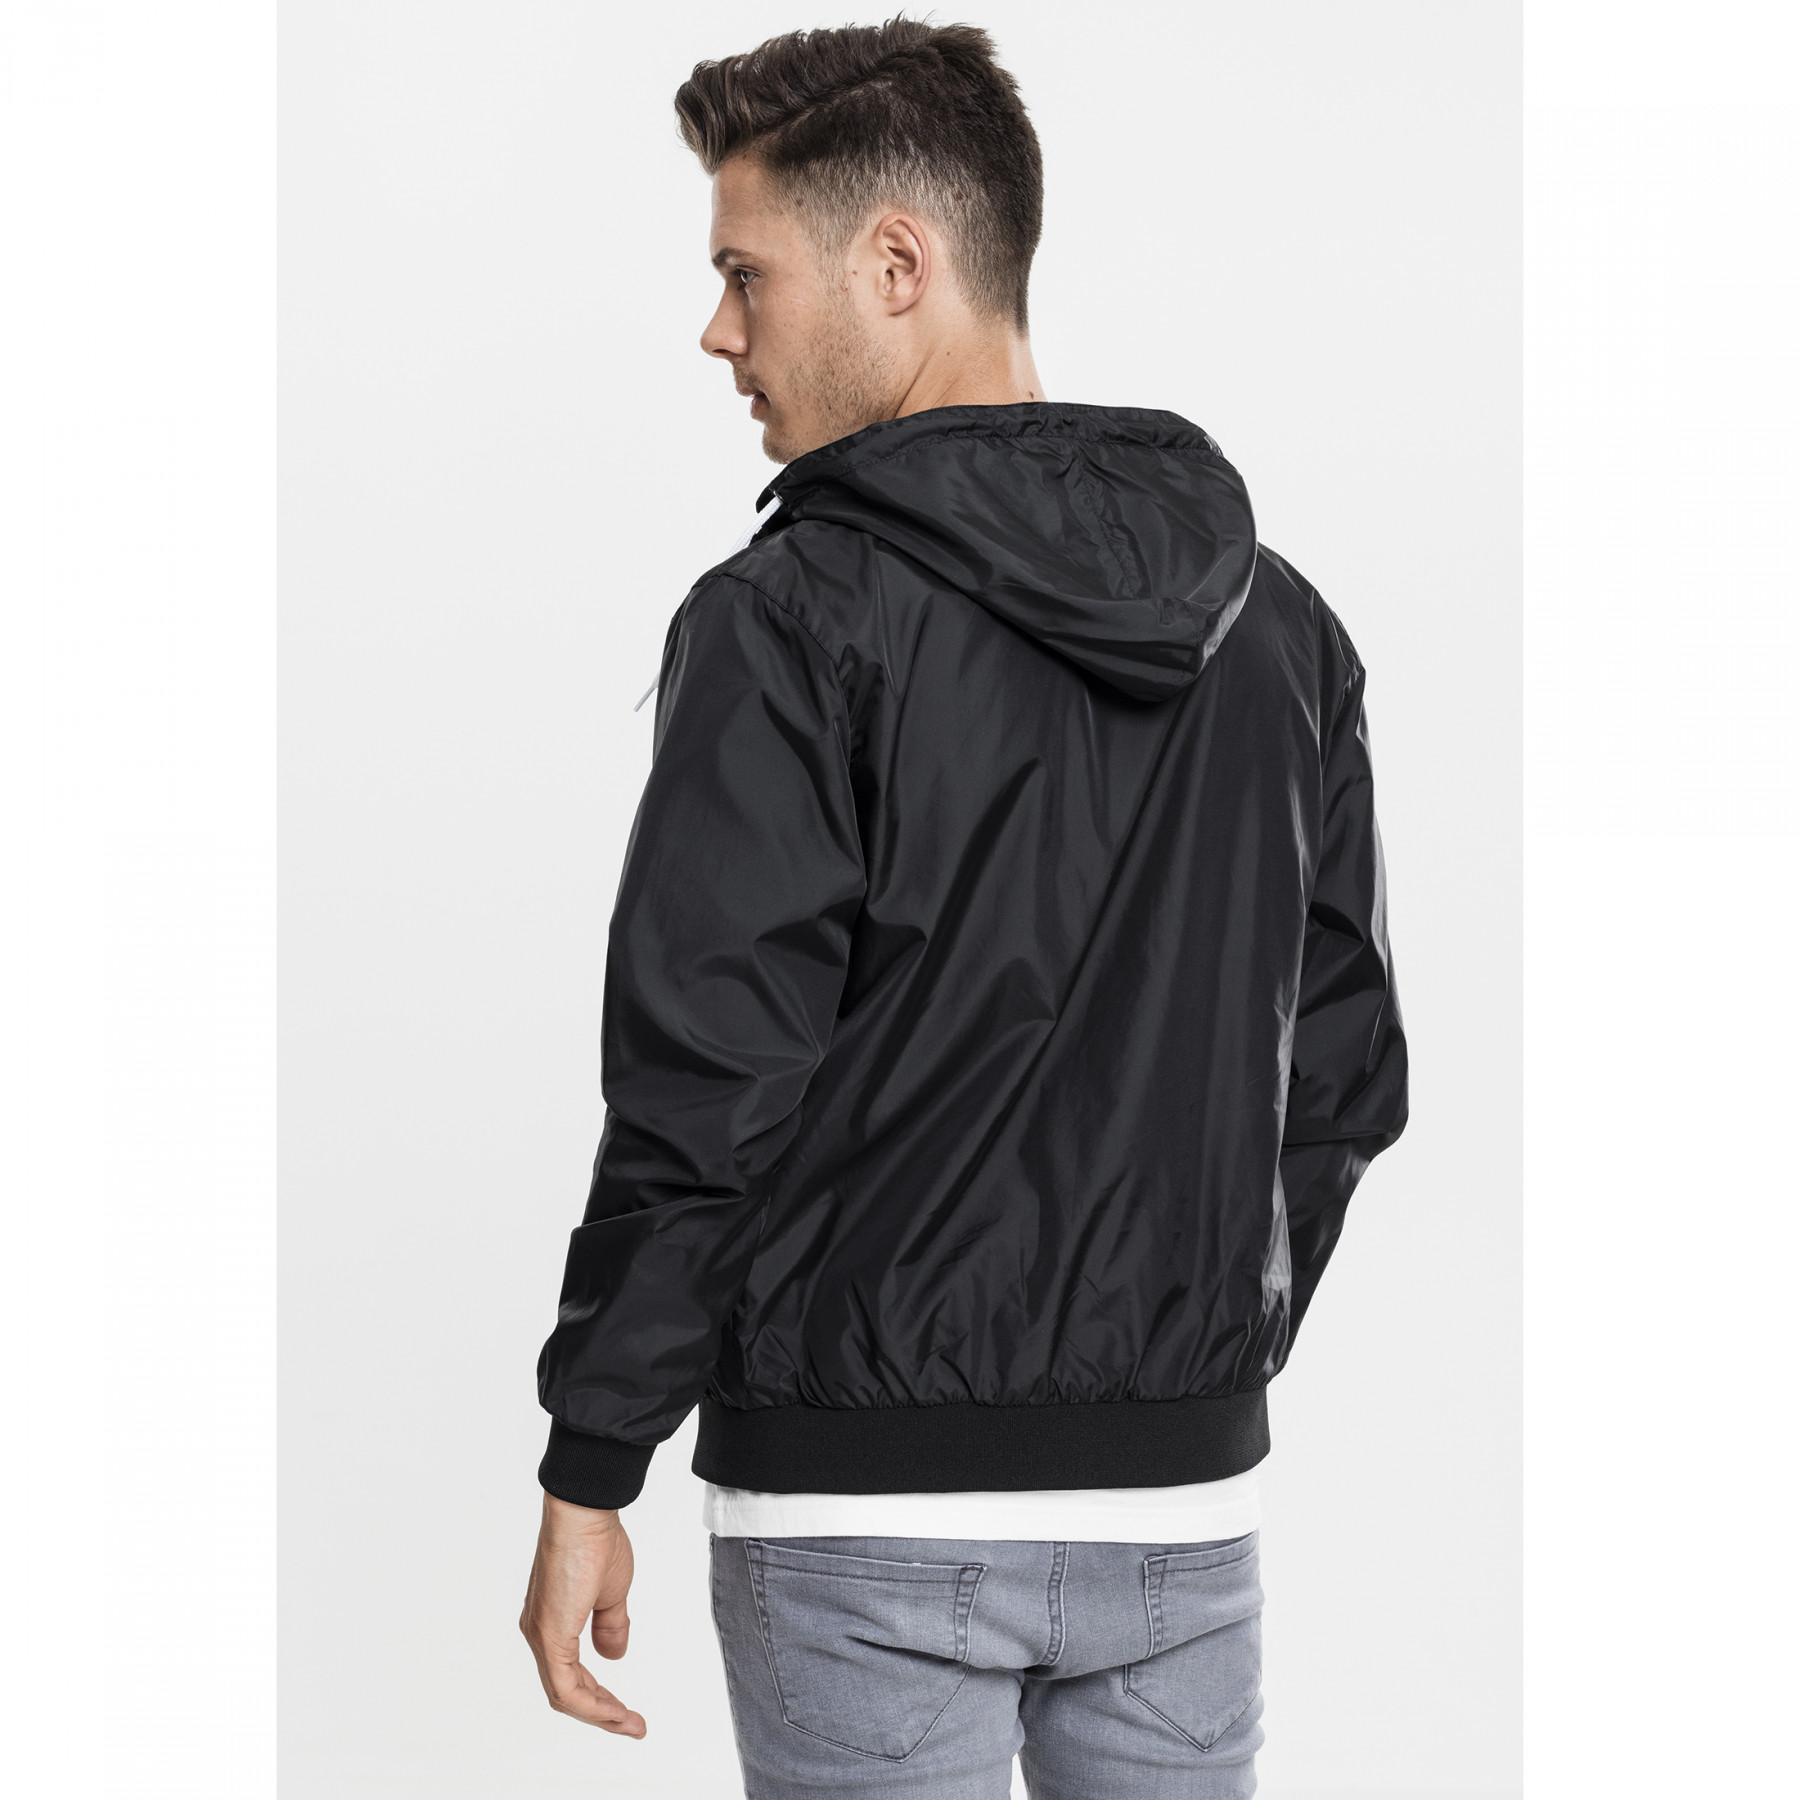 Urban Classic windstopper contract basis 2.0